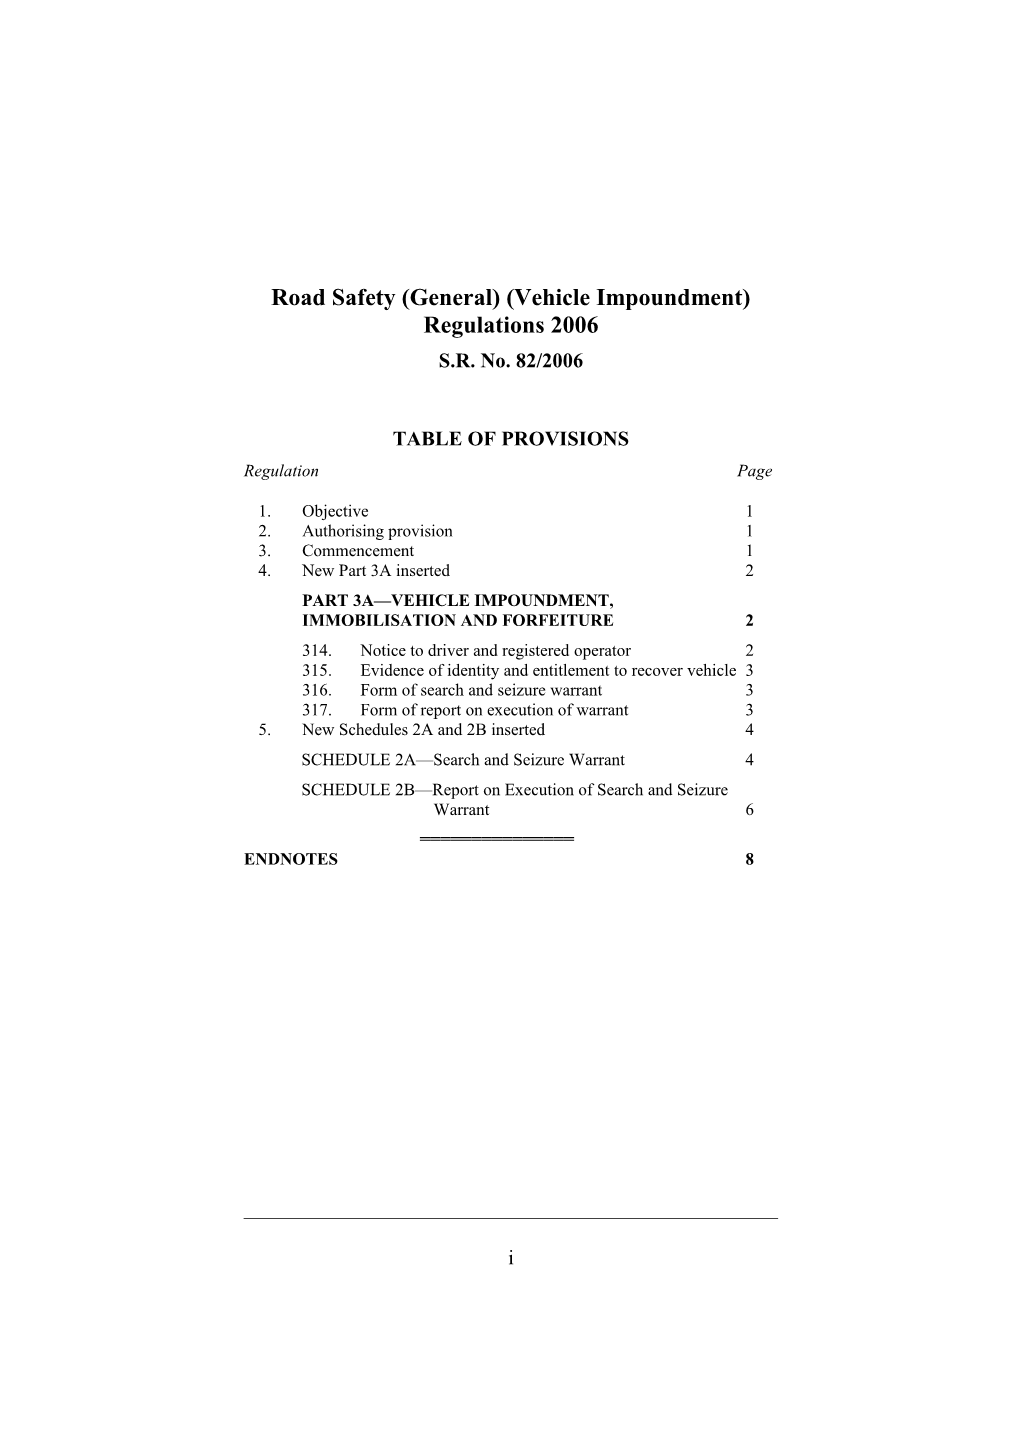 Road Safety (General) (Vehicle Impoundment) Regulations 2006